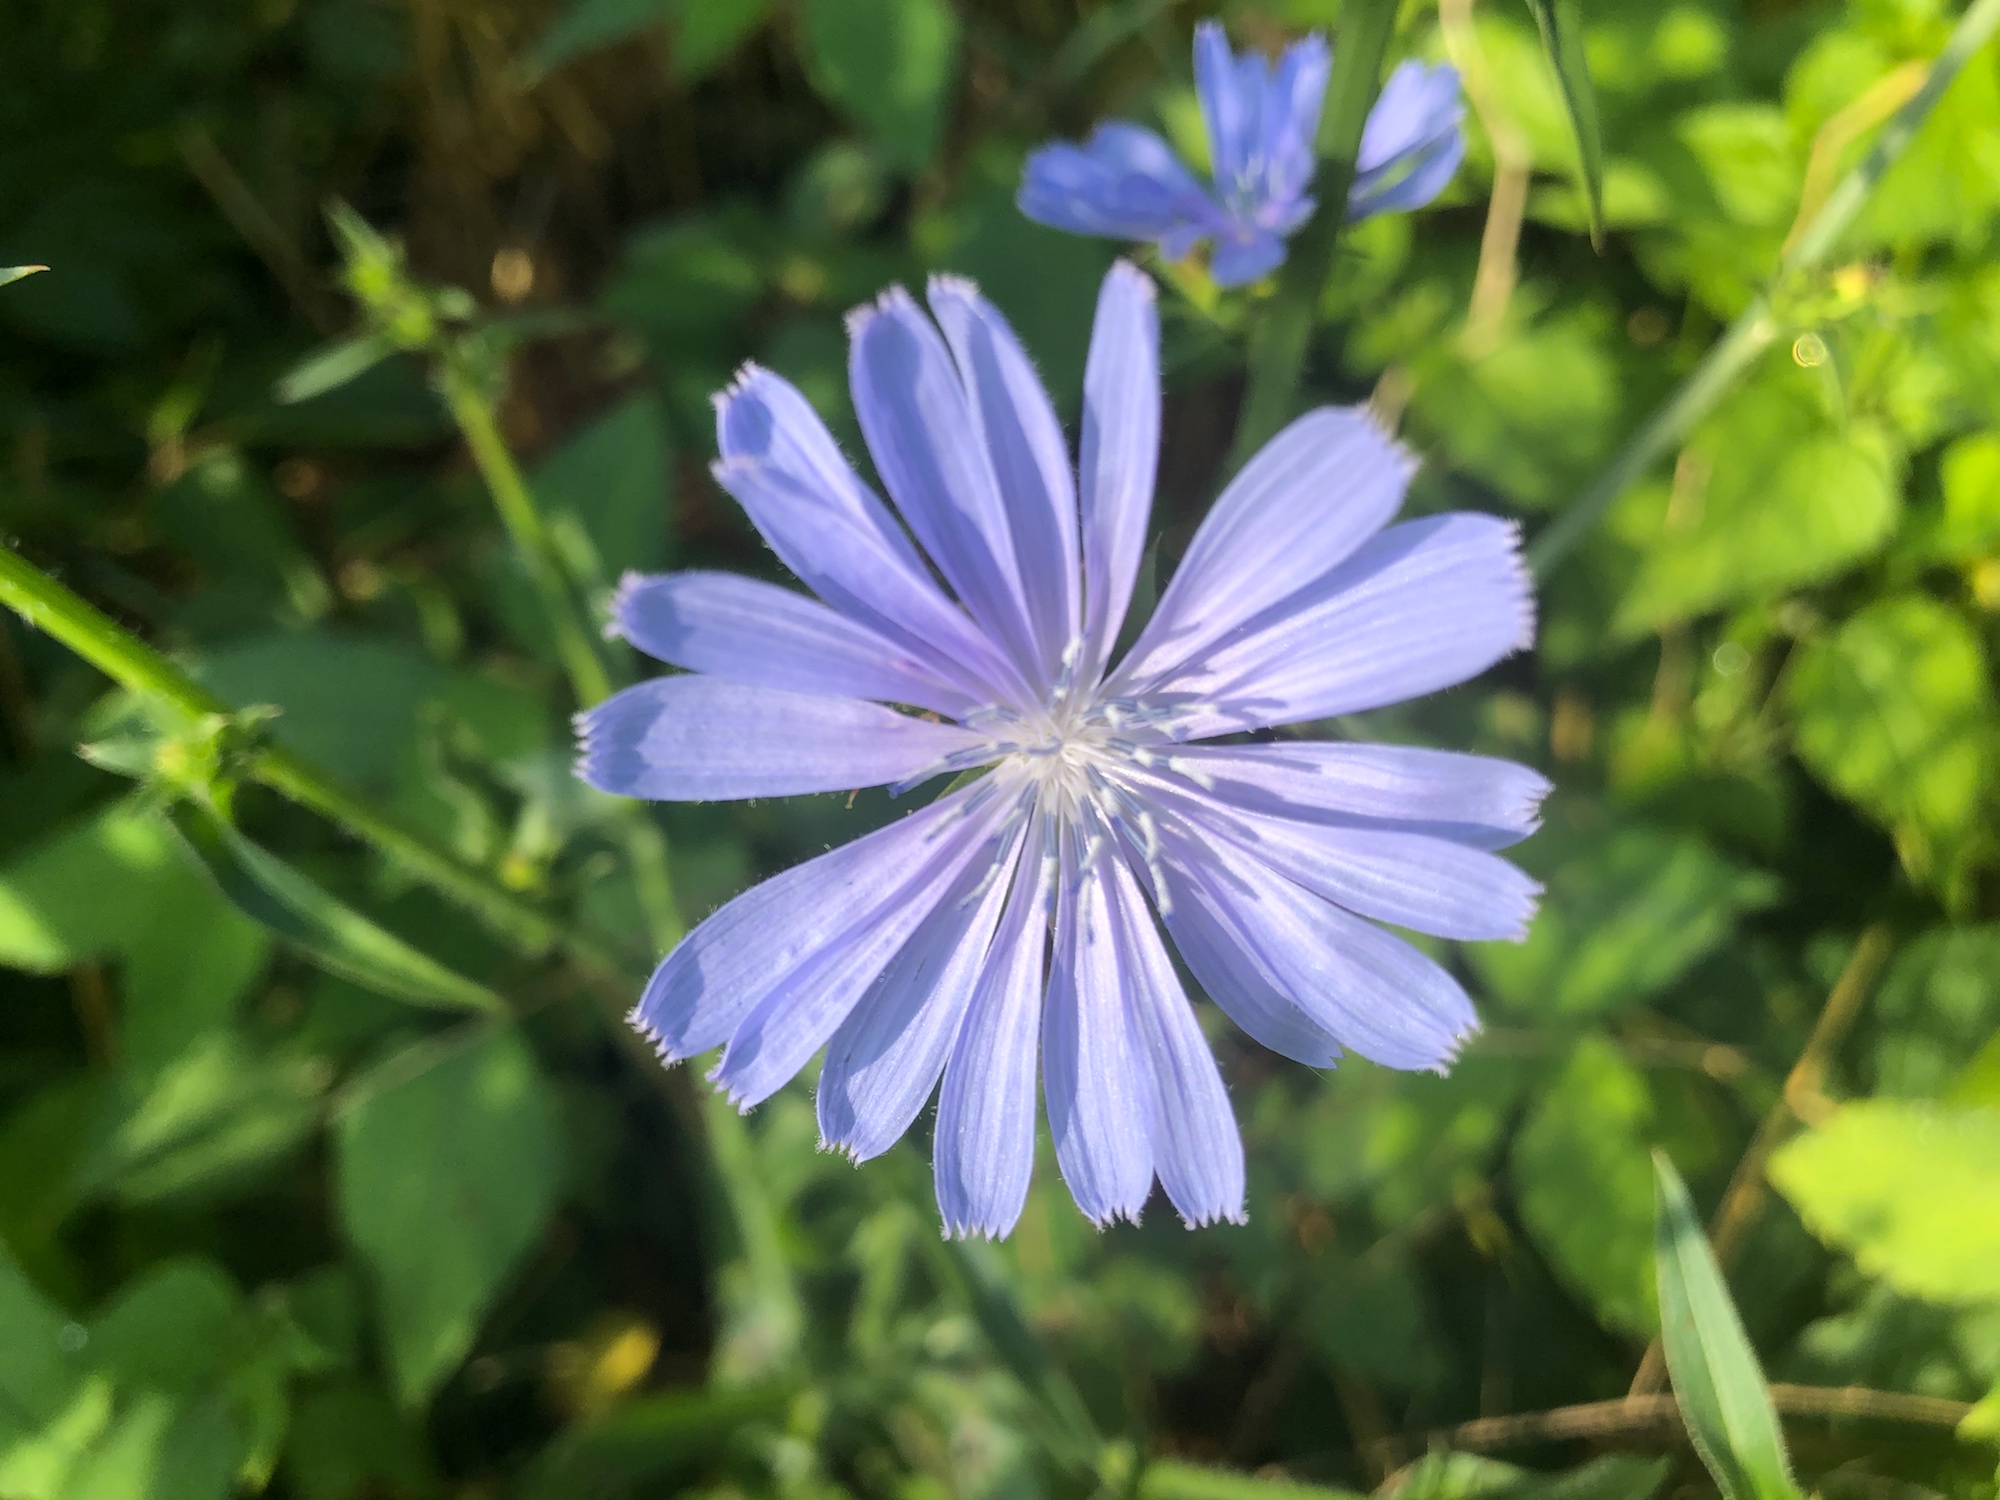 Chicory in Marion Dunn Prairie in Madison, Wisconsin on July 10, 2019.